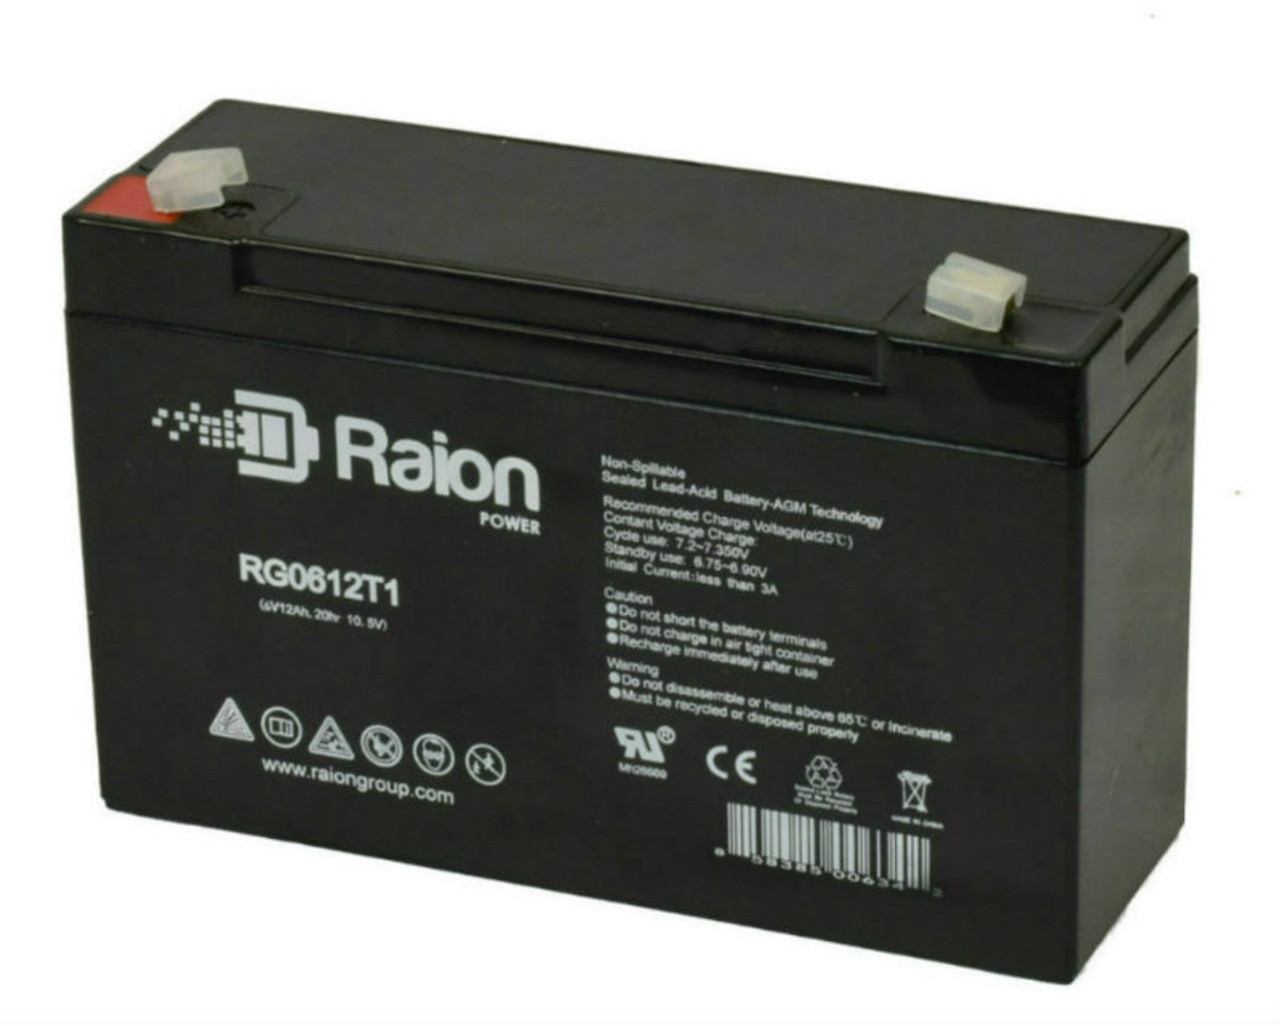 Raion Power RG06120T1 6V 12Ah Replacement UPS Battery Cartridge for MGE Pulsar ES 5+